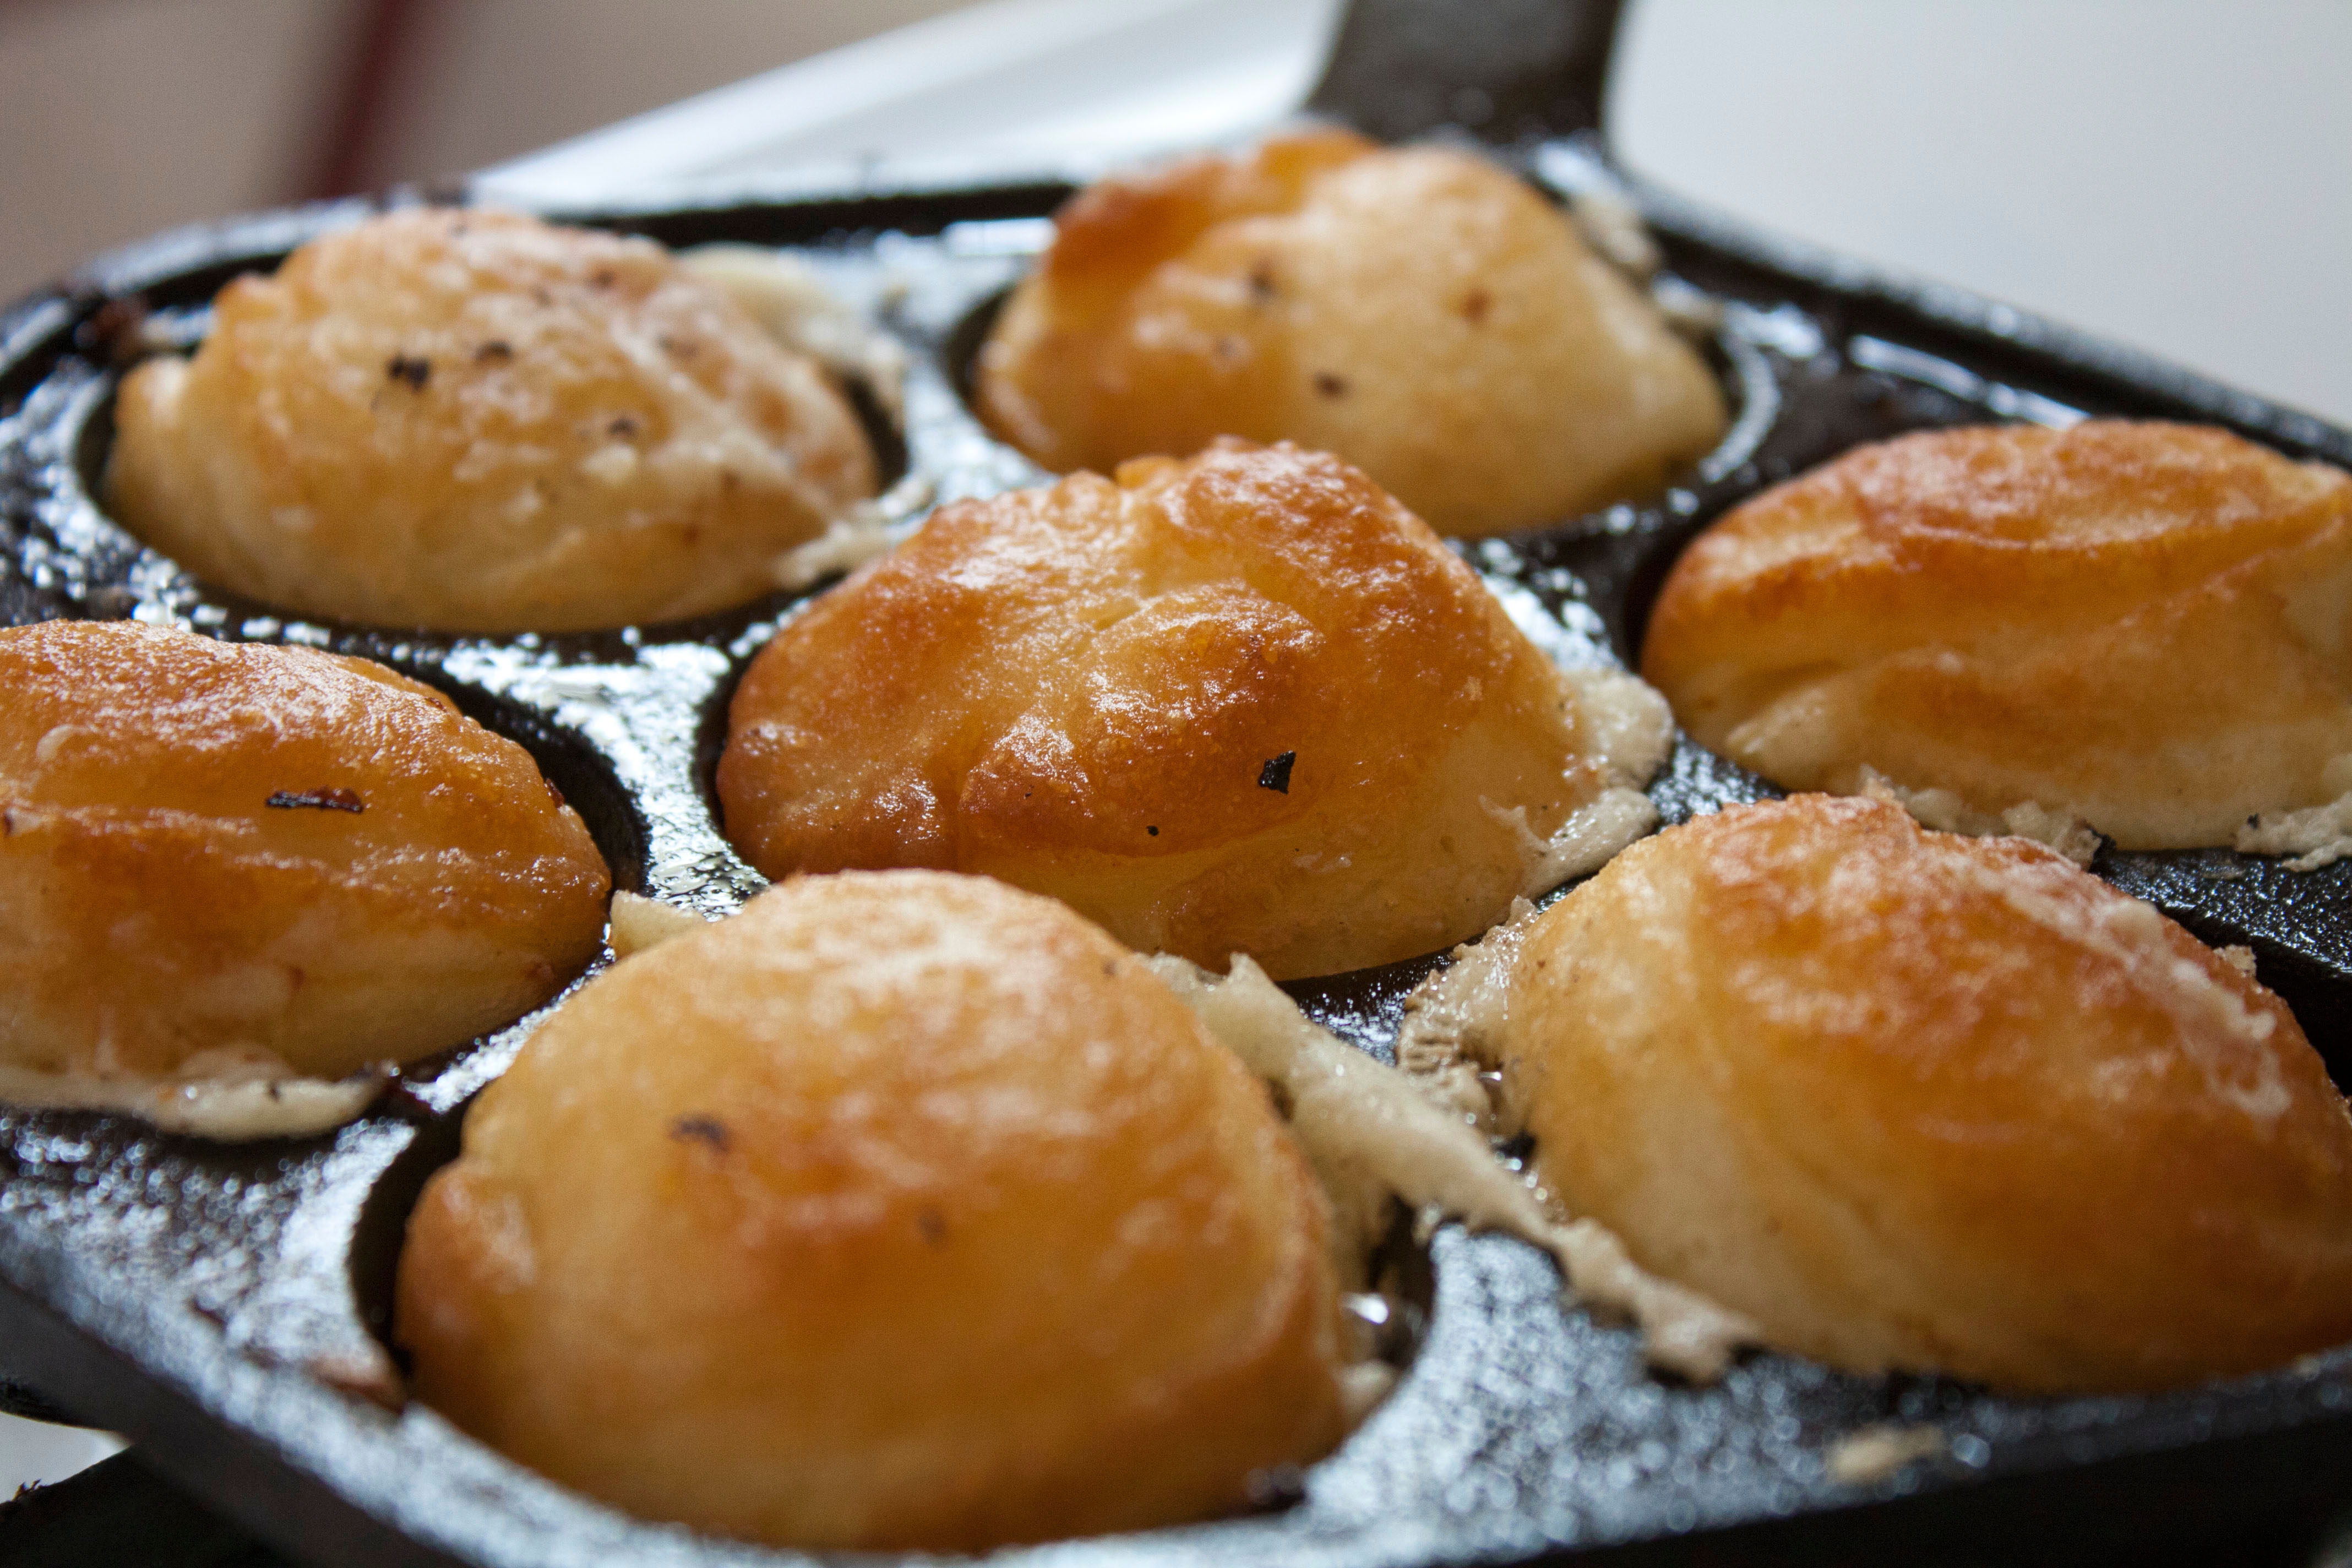 Aebleskiver Pans Are for More Than Just Aebleskivers